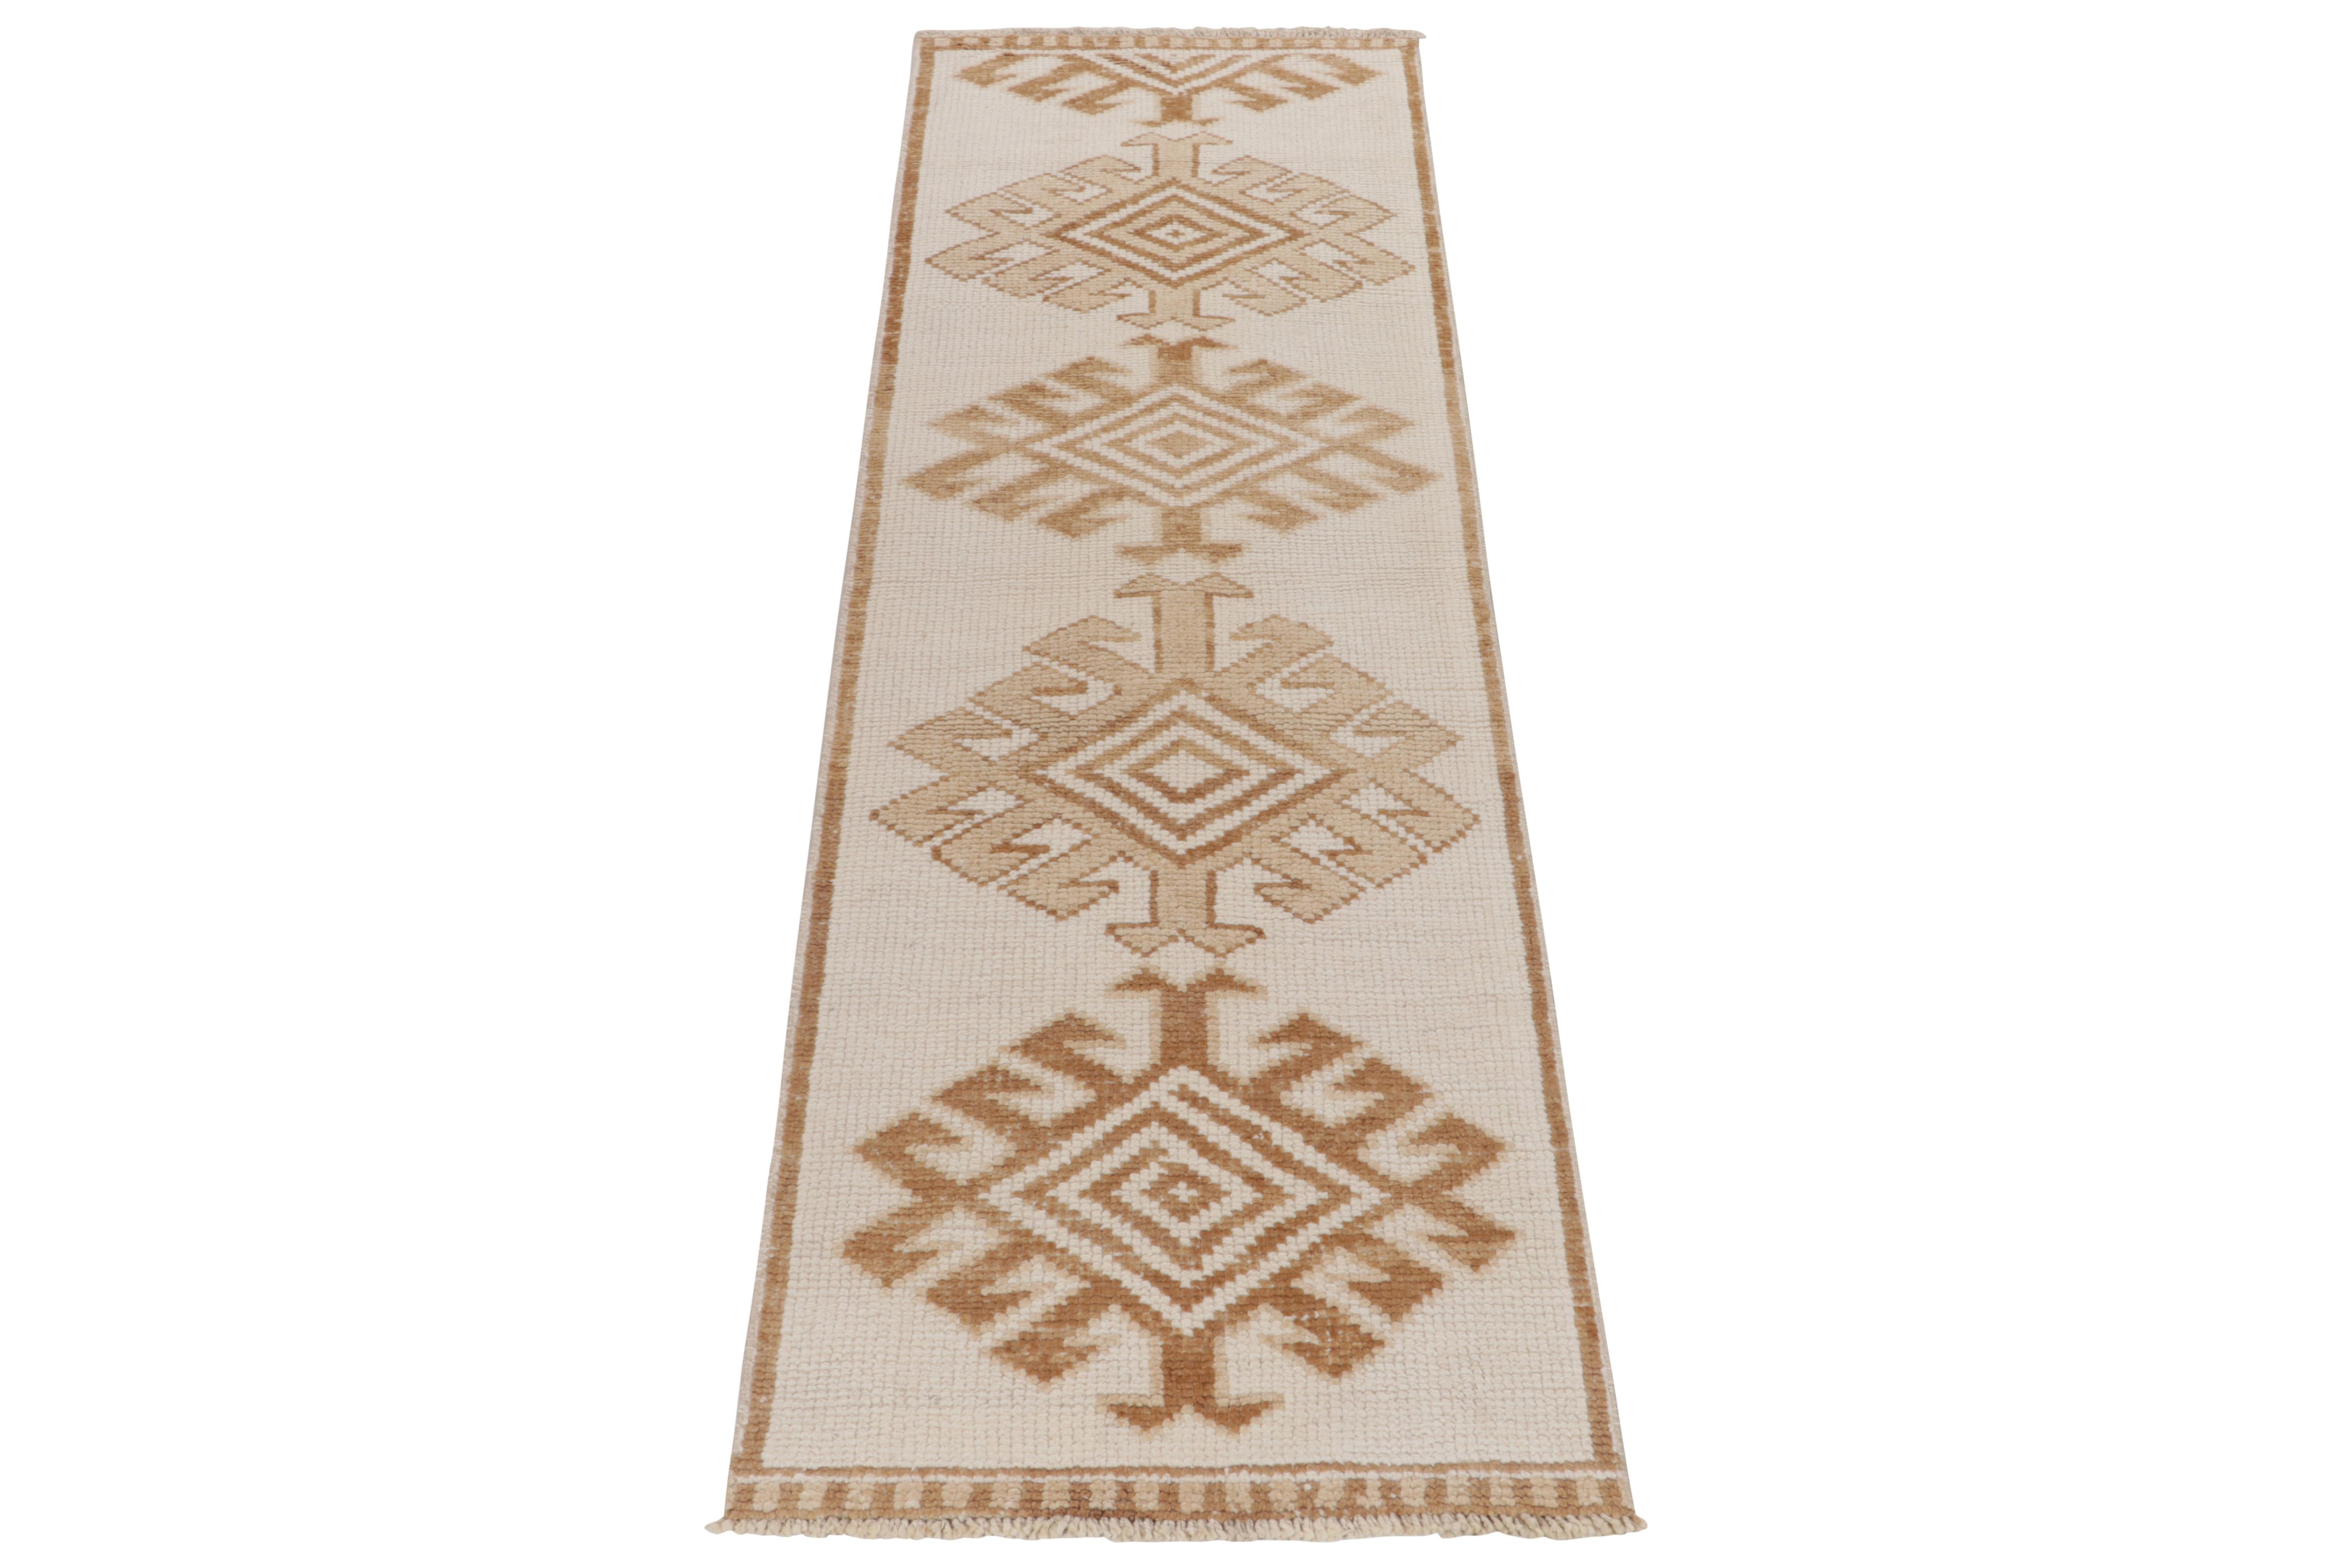 From Rug & Kilim’s vintage selections, a 3x10 hand-knotted wool runner bearing striking nomadic influences. The 1950s tribal piece showcases traditional motifs with latch hooks on the field in creamy white & brown tones casting a gorgeous gradient